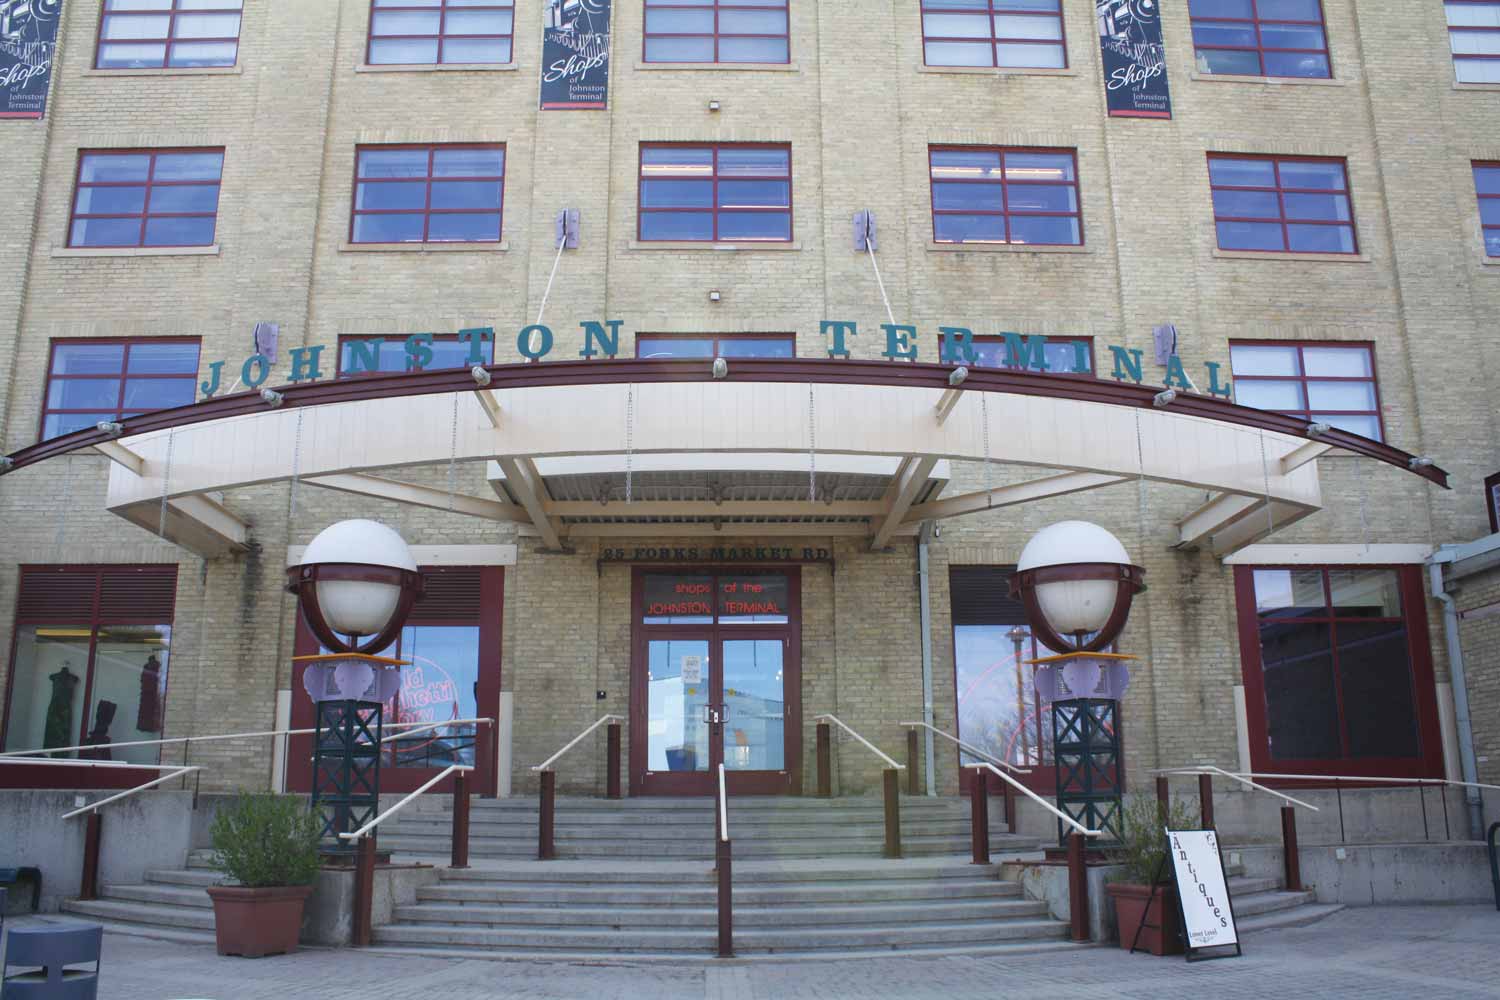 Entrance to Johnston Terminal, featuring a curved entrance canopy and stairs leading up to a door.